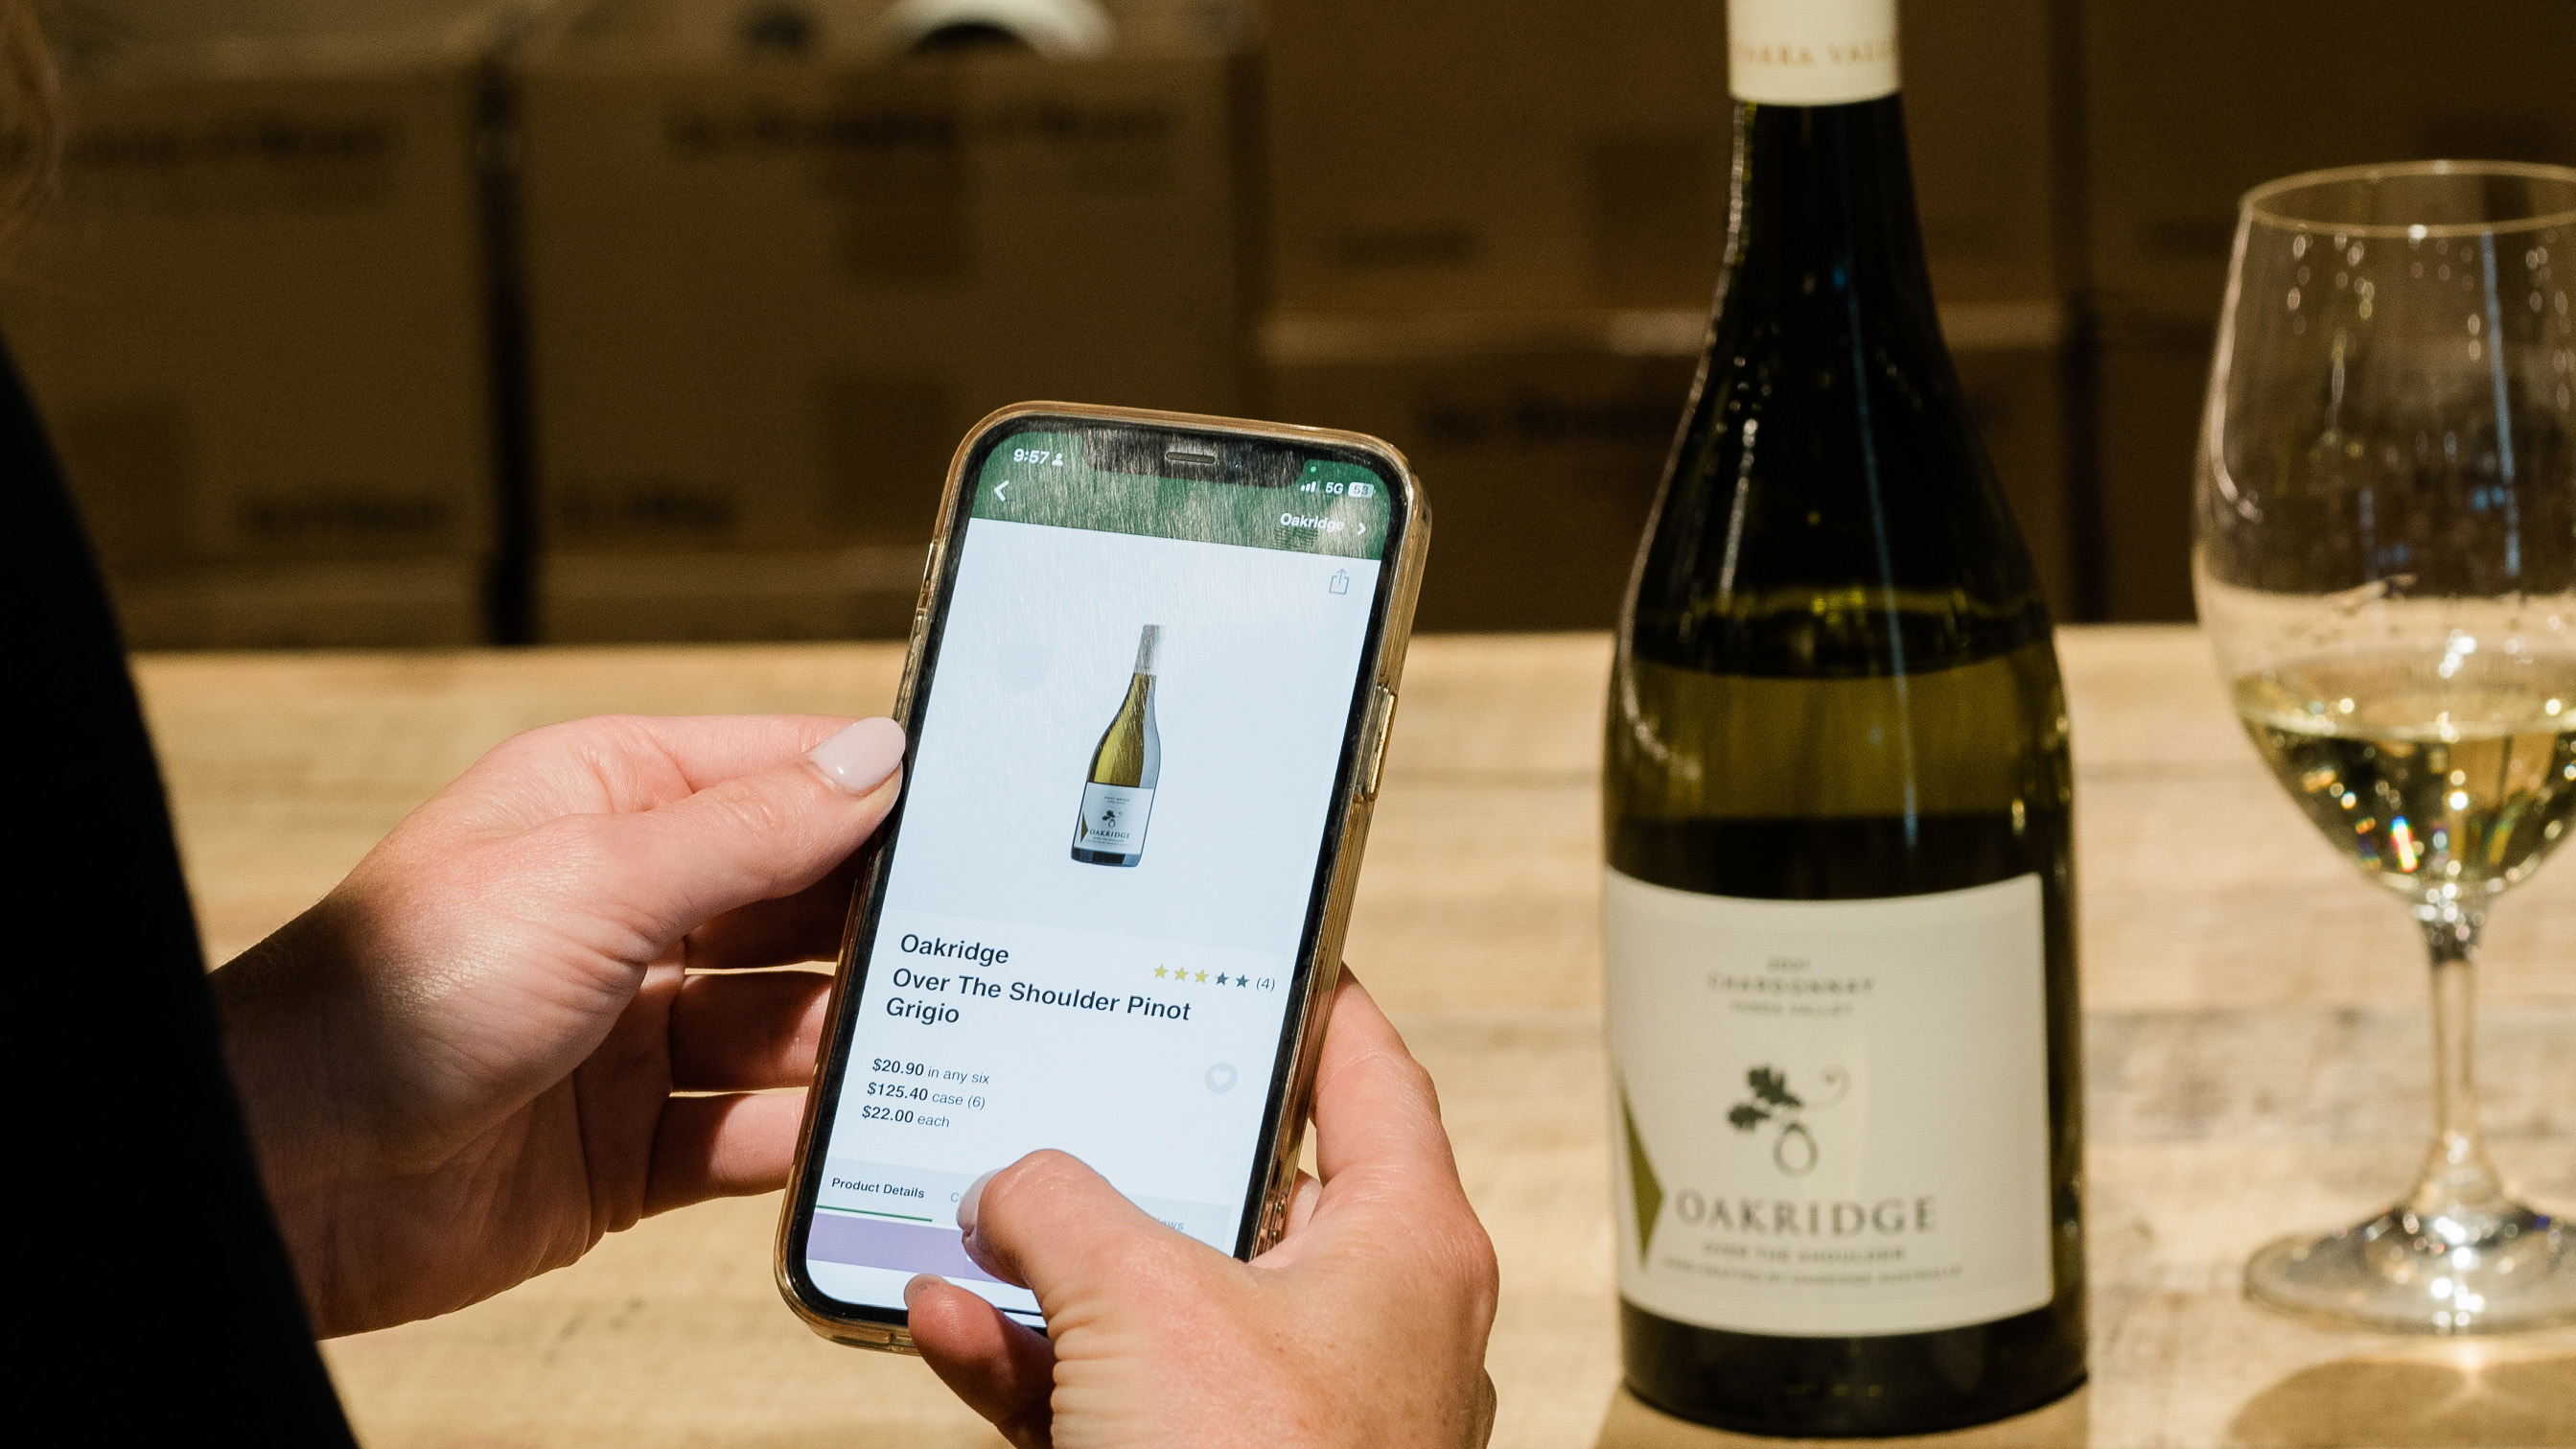 Dan Murphys Drinkers Will Be Able To Search For Wines Via Label Photos